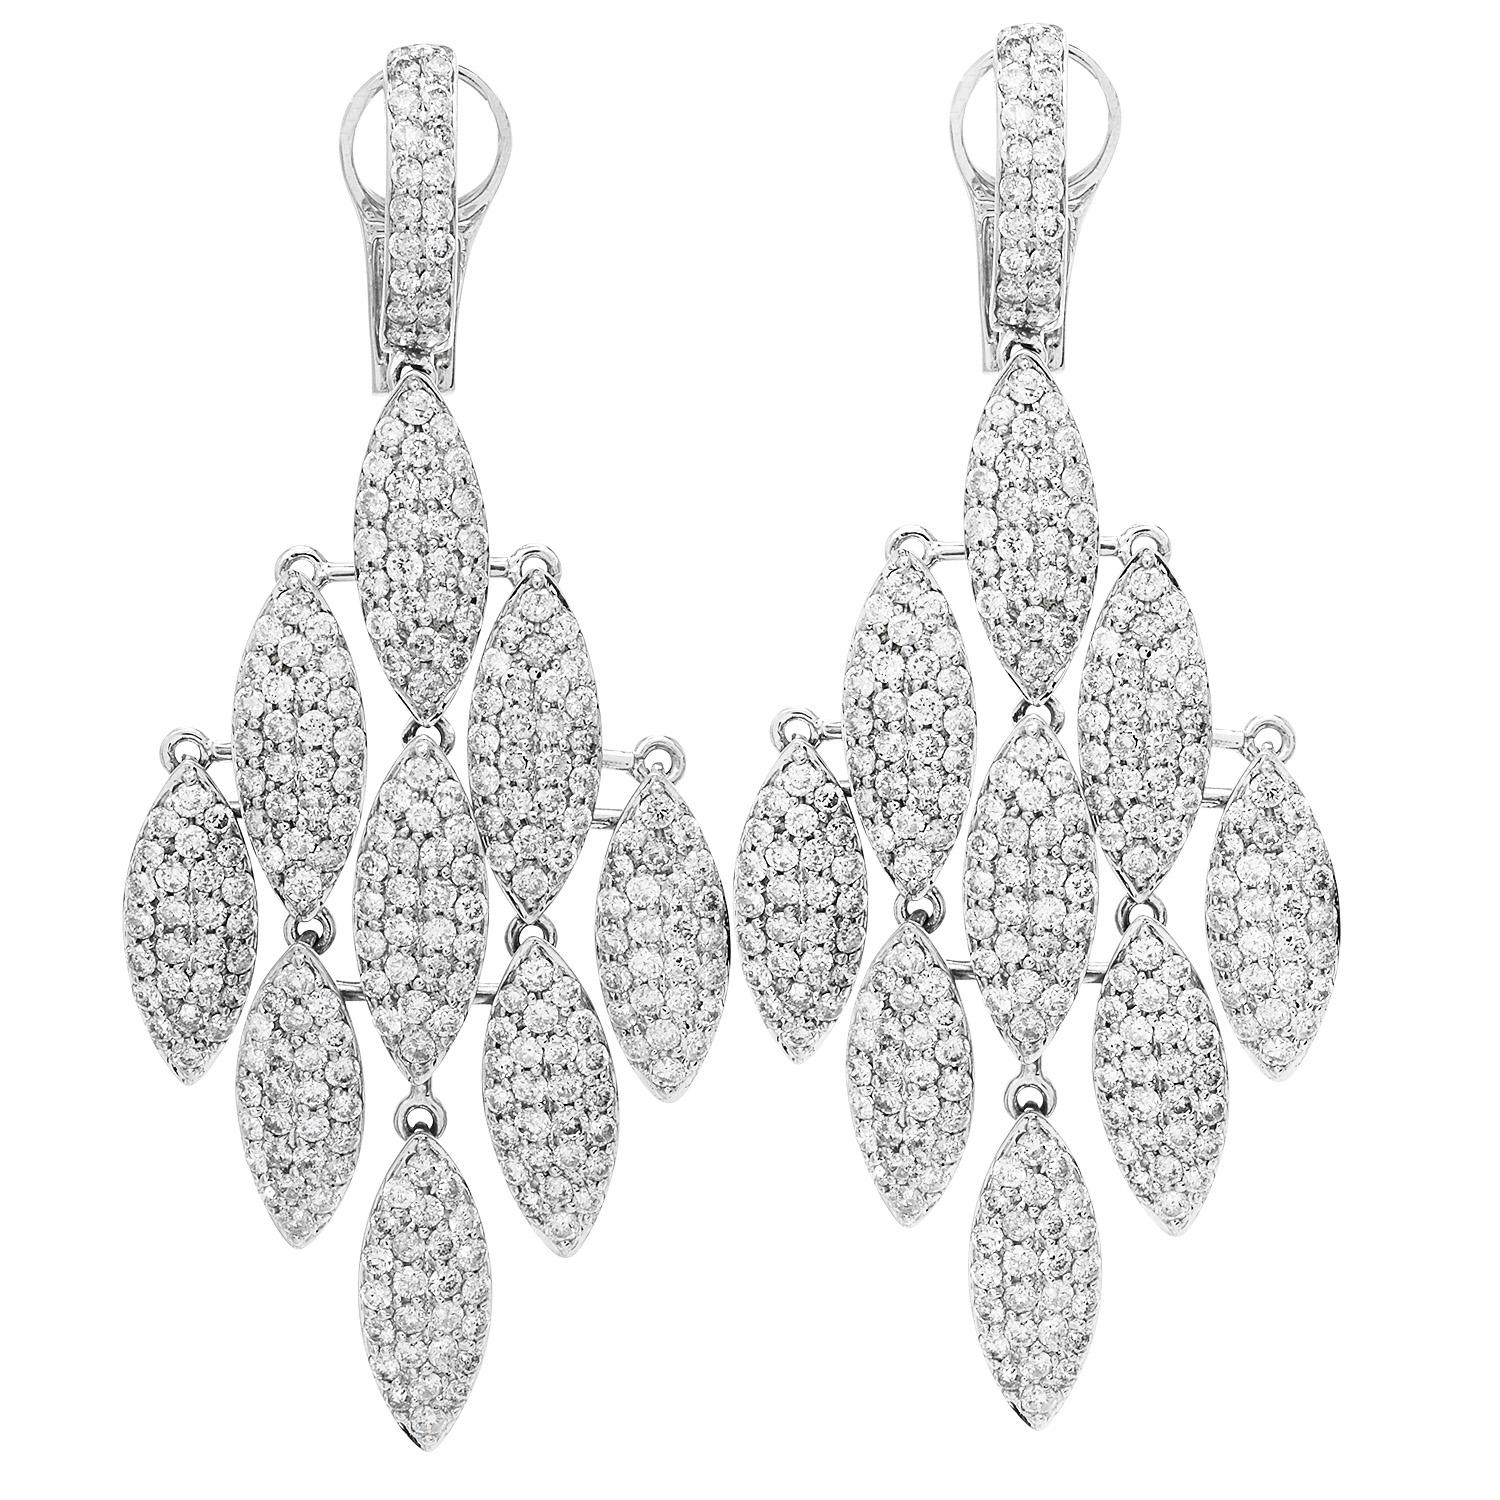 These Chandelier-style drop design earrings are full of sparkle!

Crafted in solid 14K White Gold, 

Nine cluster marquise shape links, dangle from each diamond-accented earring, 

A total of 342 round-cut diamonds weighing approximately 7.29 carats